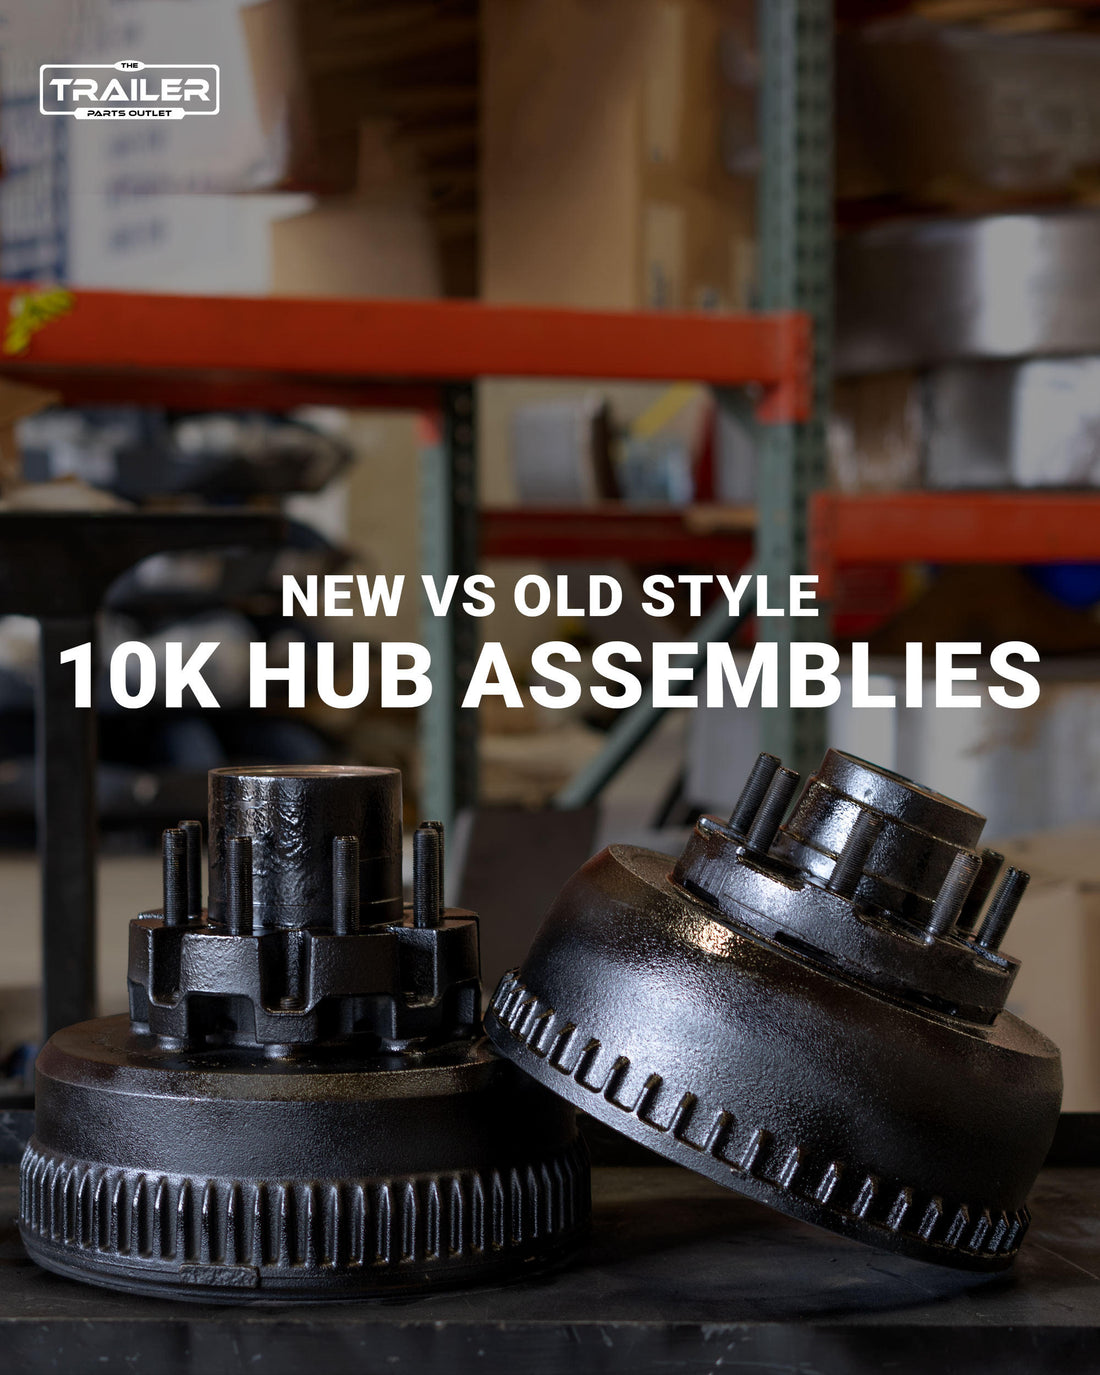 What's the Difference Between the Old vs. New 10k Dexter Hub?